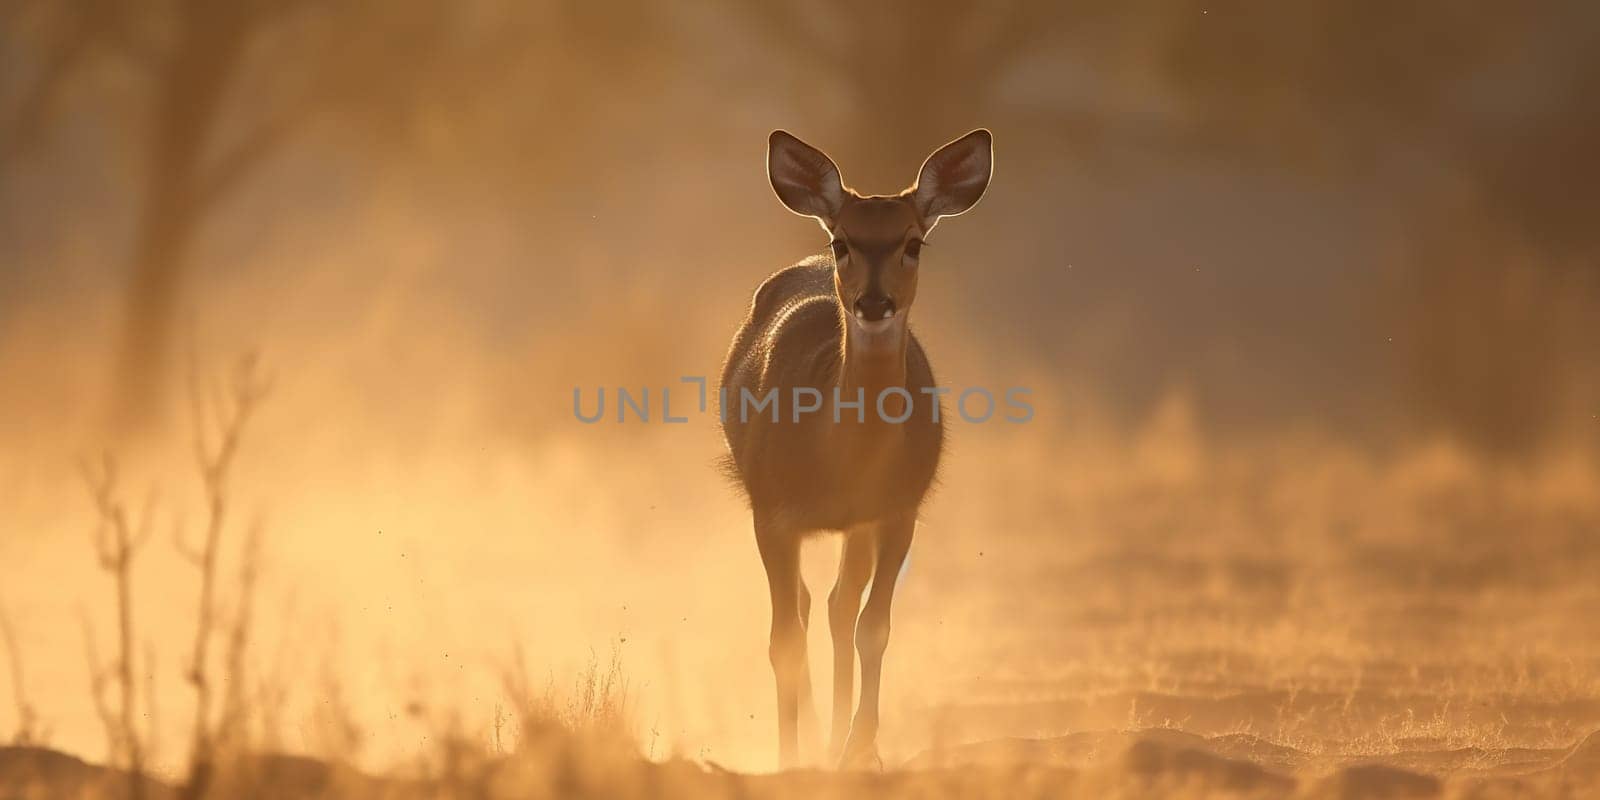 Young deer wandering through the steppe by tan4ikk1